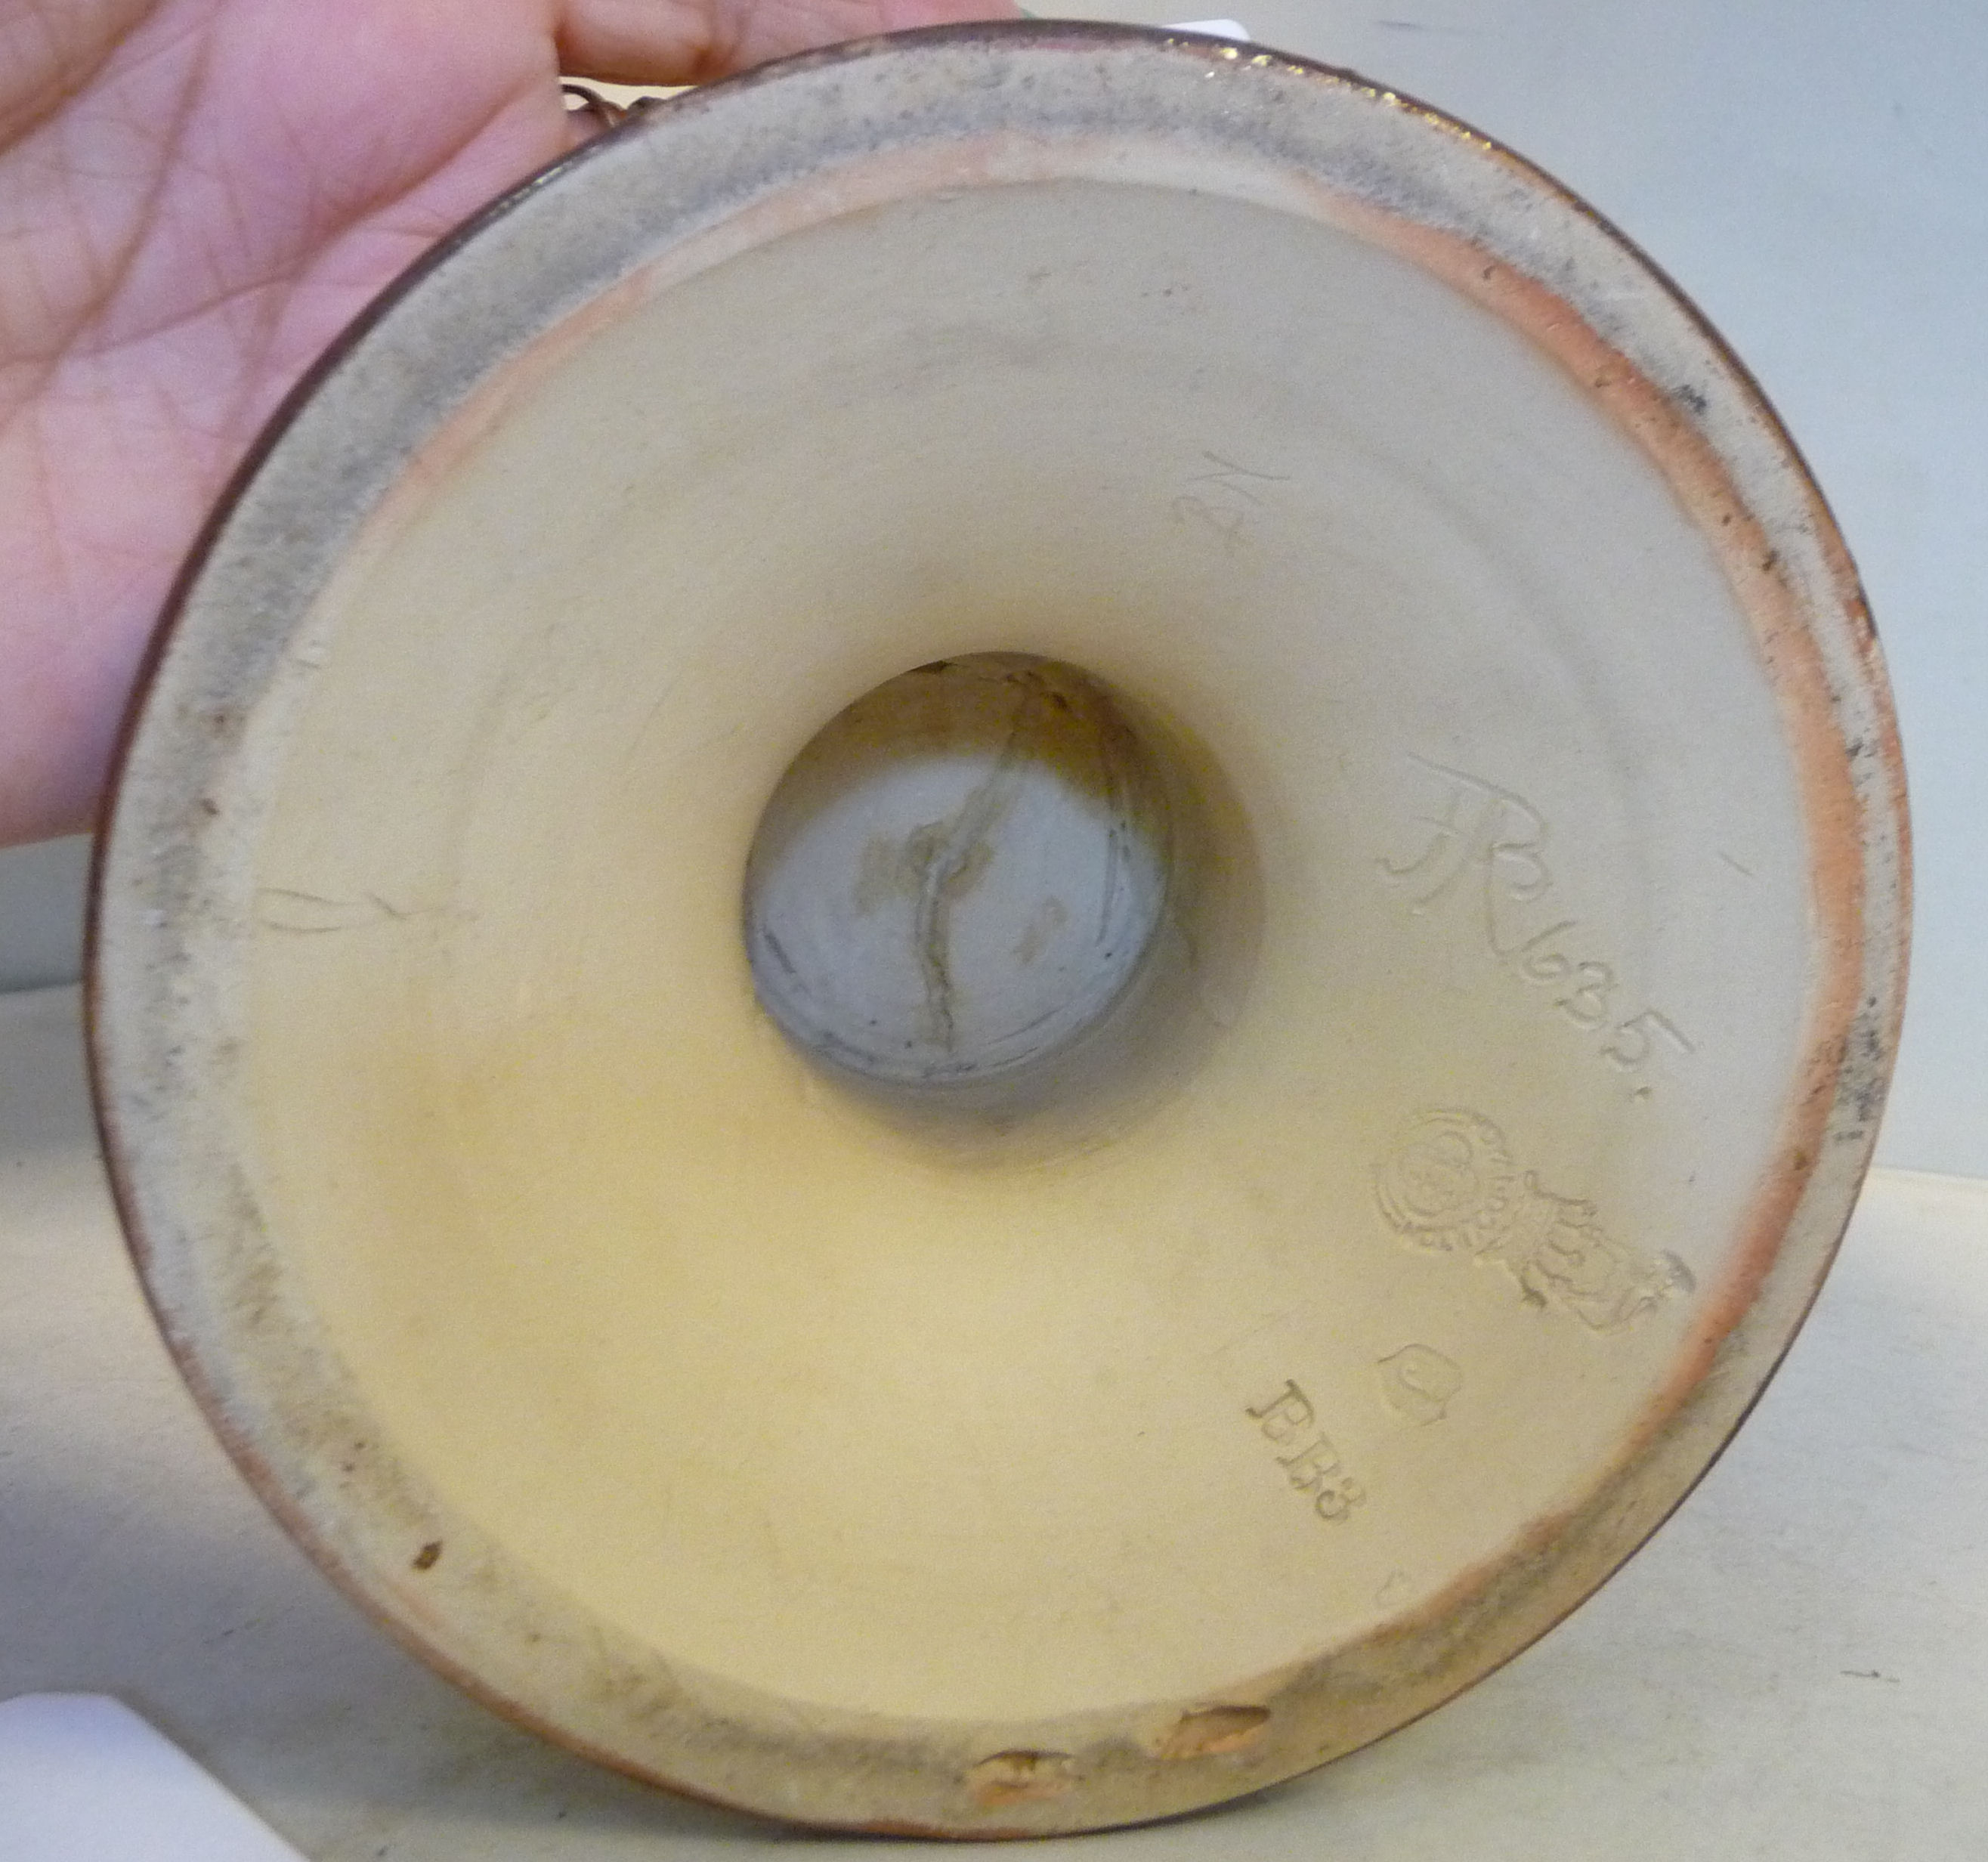 A Royal Doulton stoneware vase of shouldered, ovoid form with a narrow neck and flared rim, - Image 7 of 10